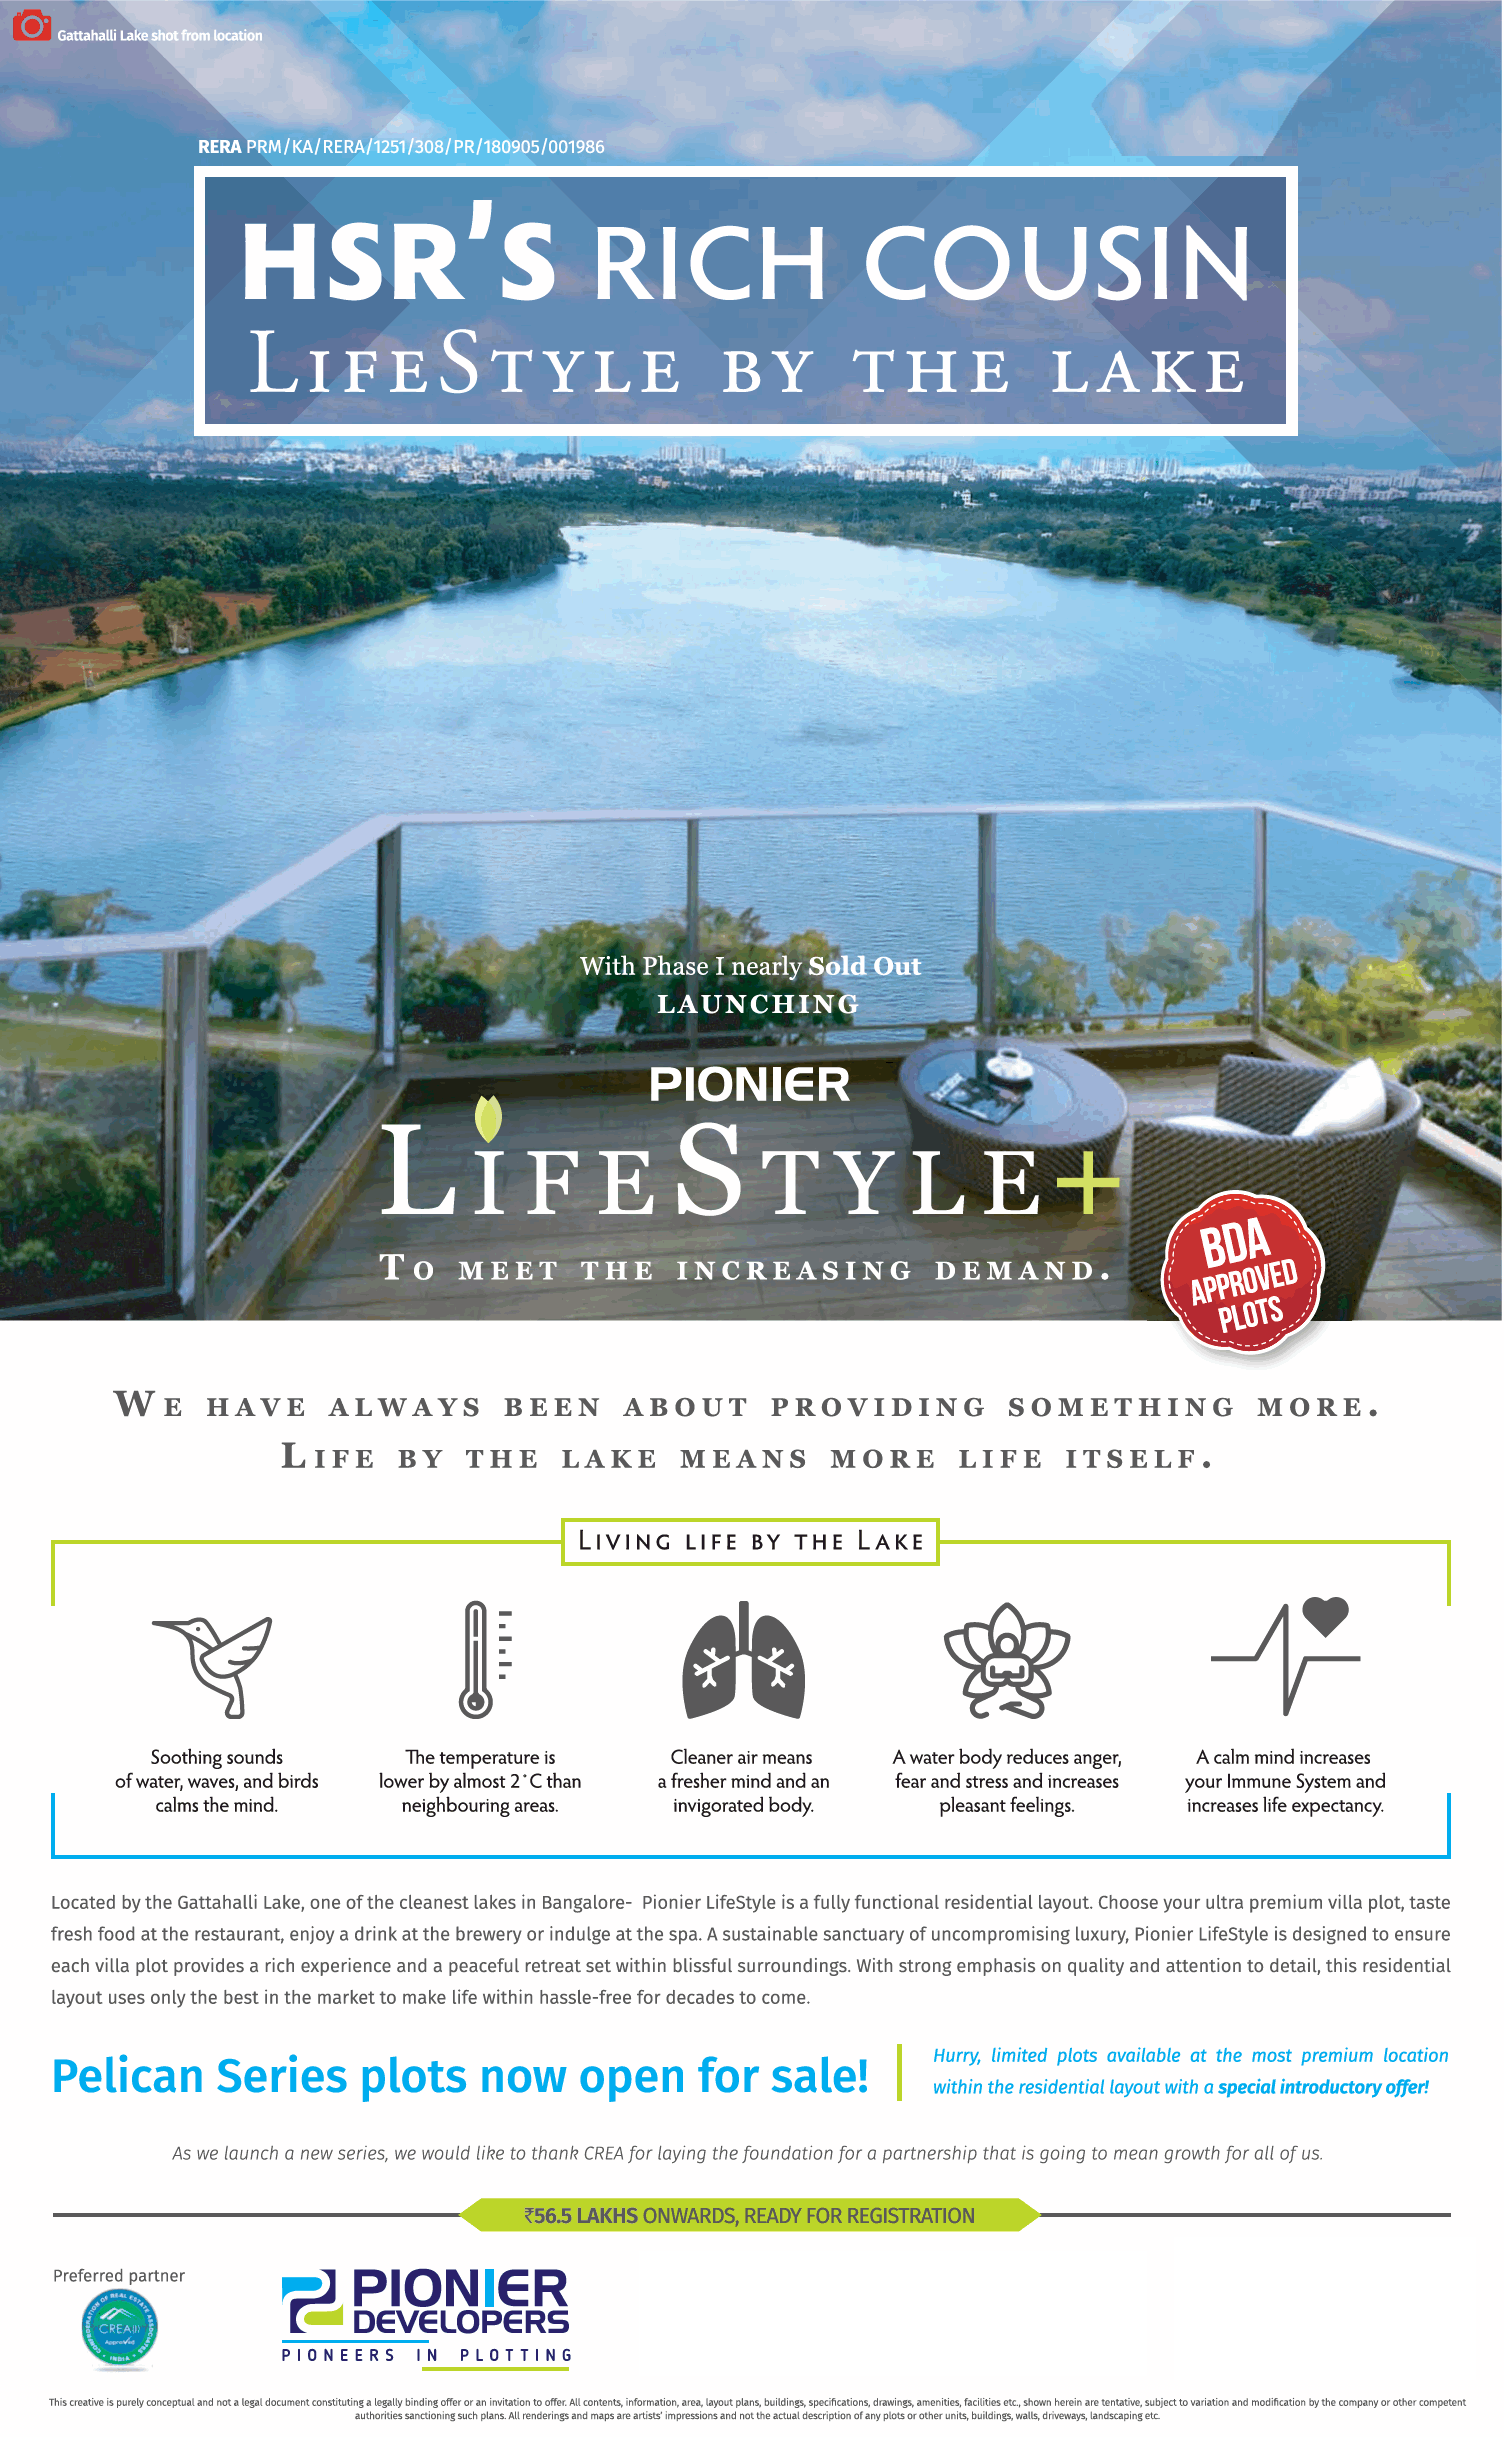 Pionier launching pelicon series plots at Lifestyle in Bangalore